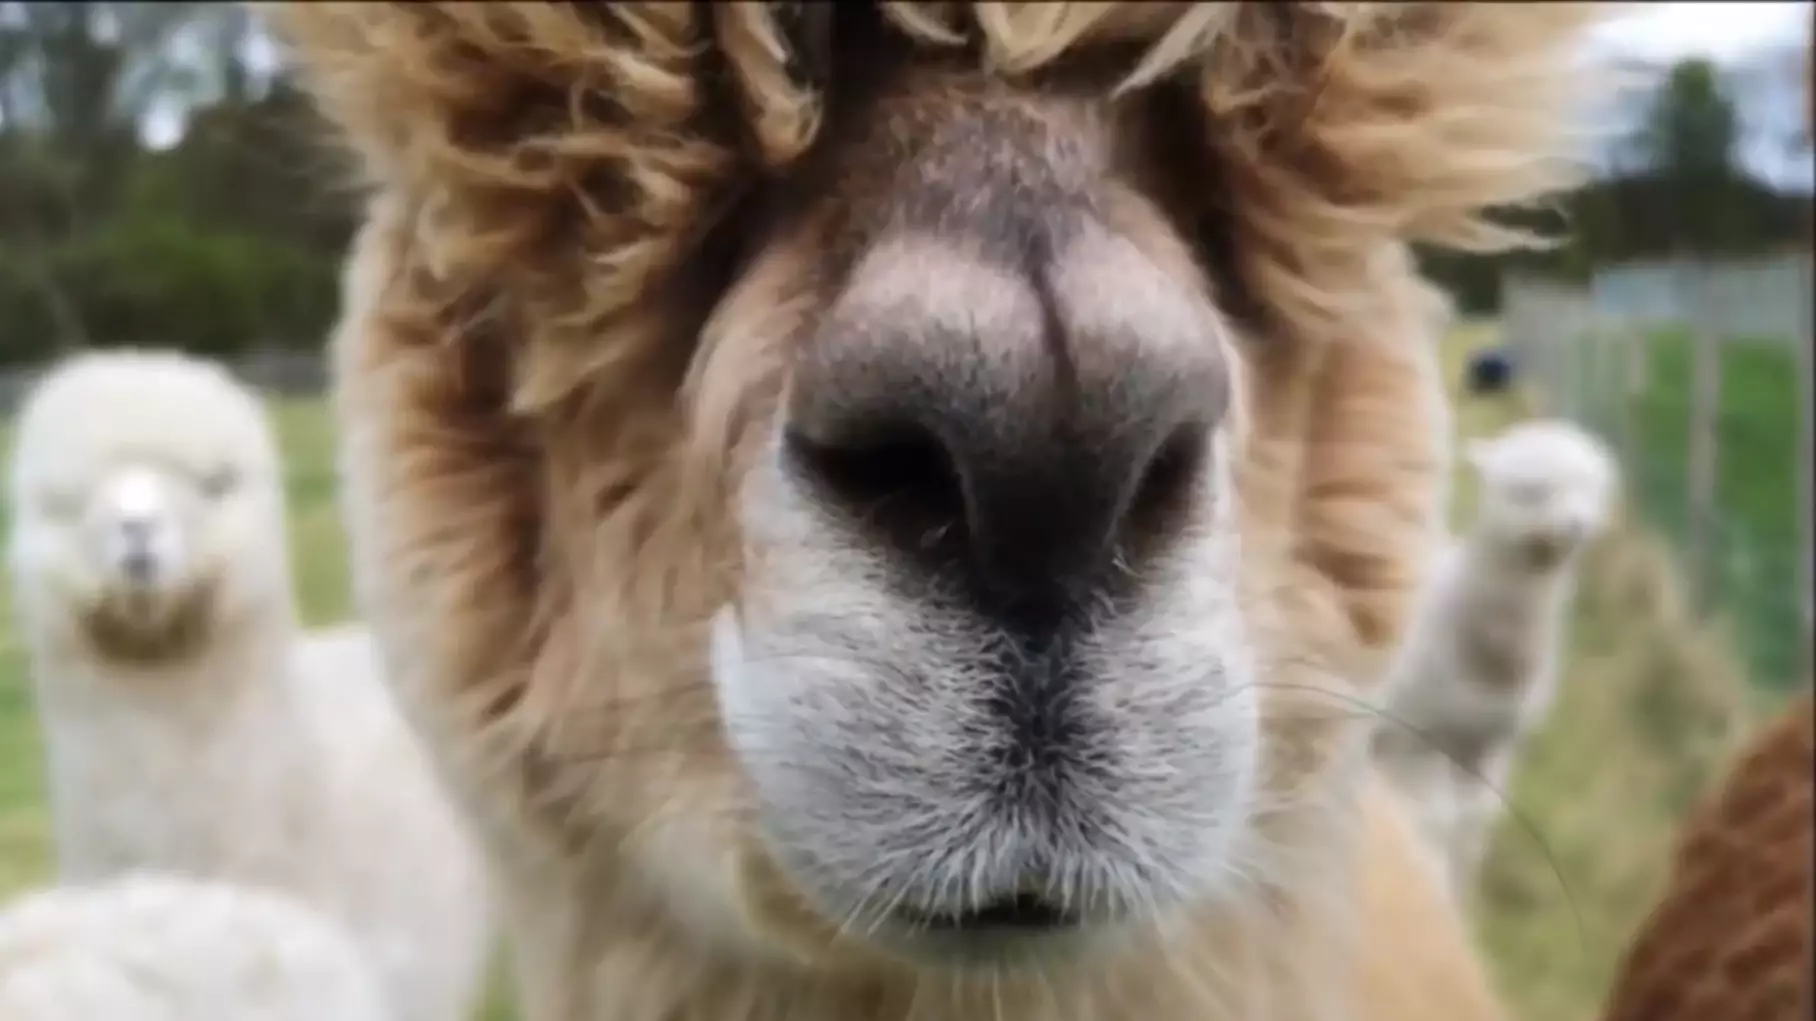 Donate To Charity For A Meet And Greet Zoom Call With Some Alpacas